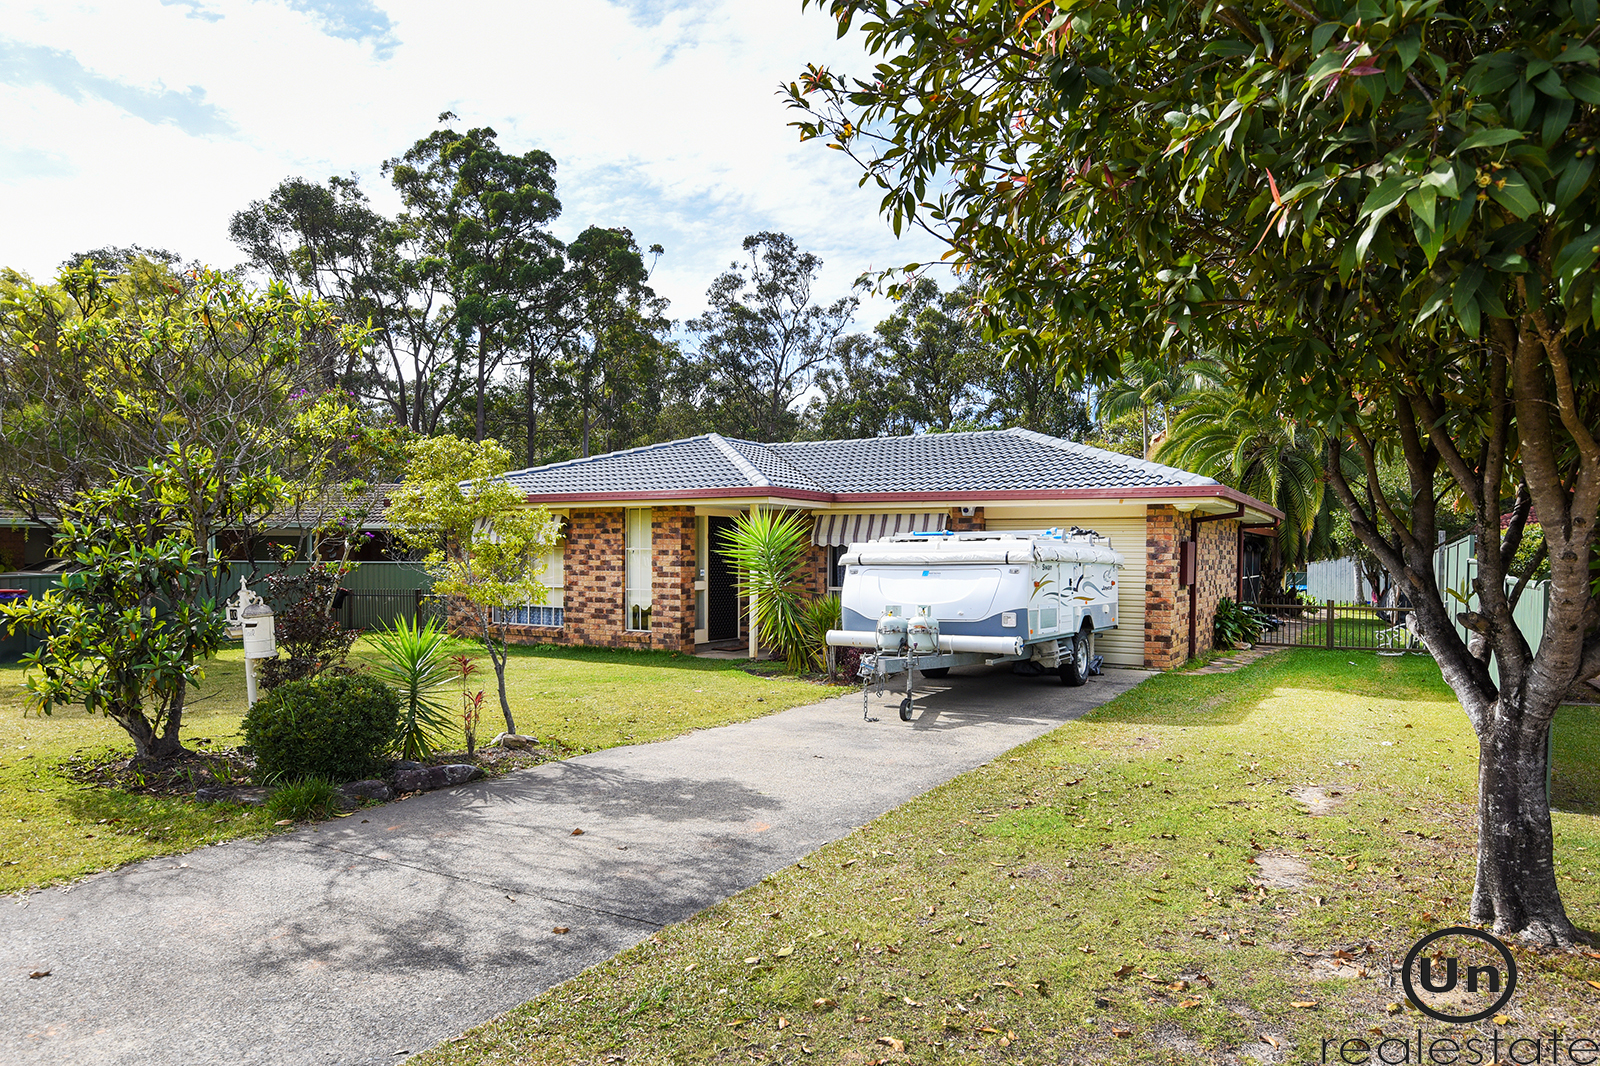 10 Sunbird Crescent, Boambee East - Front of house